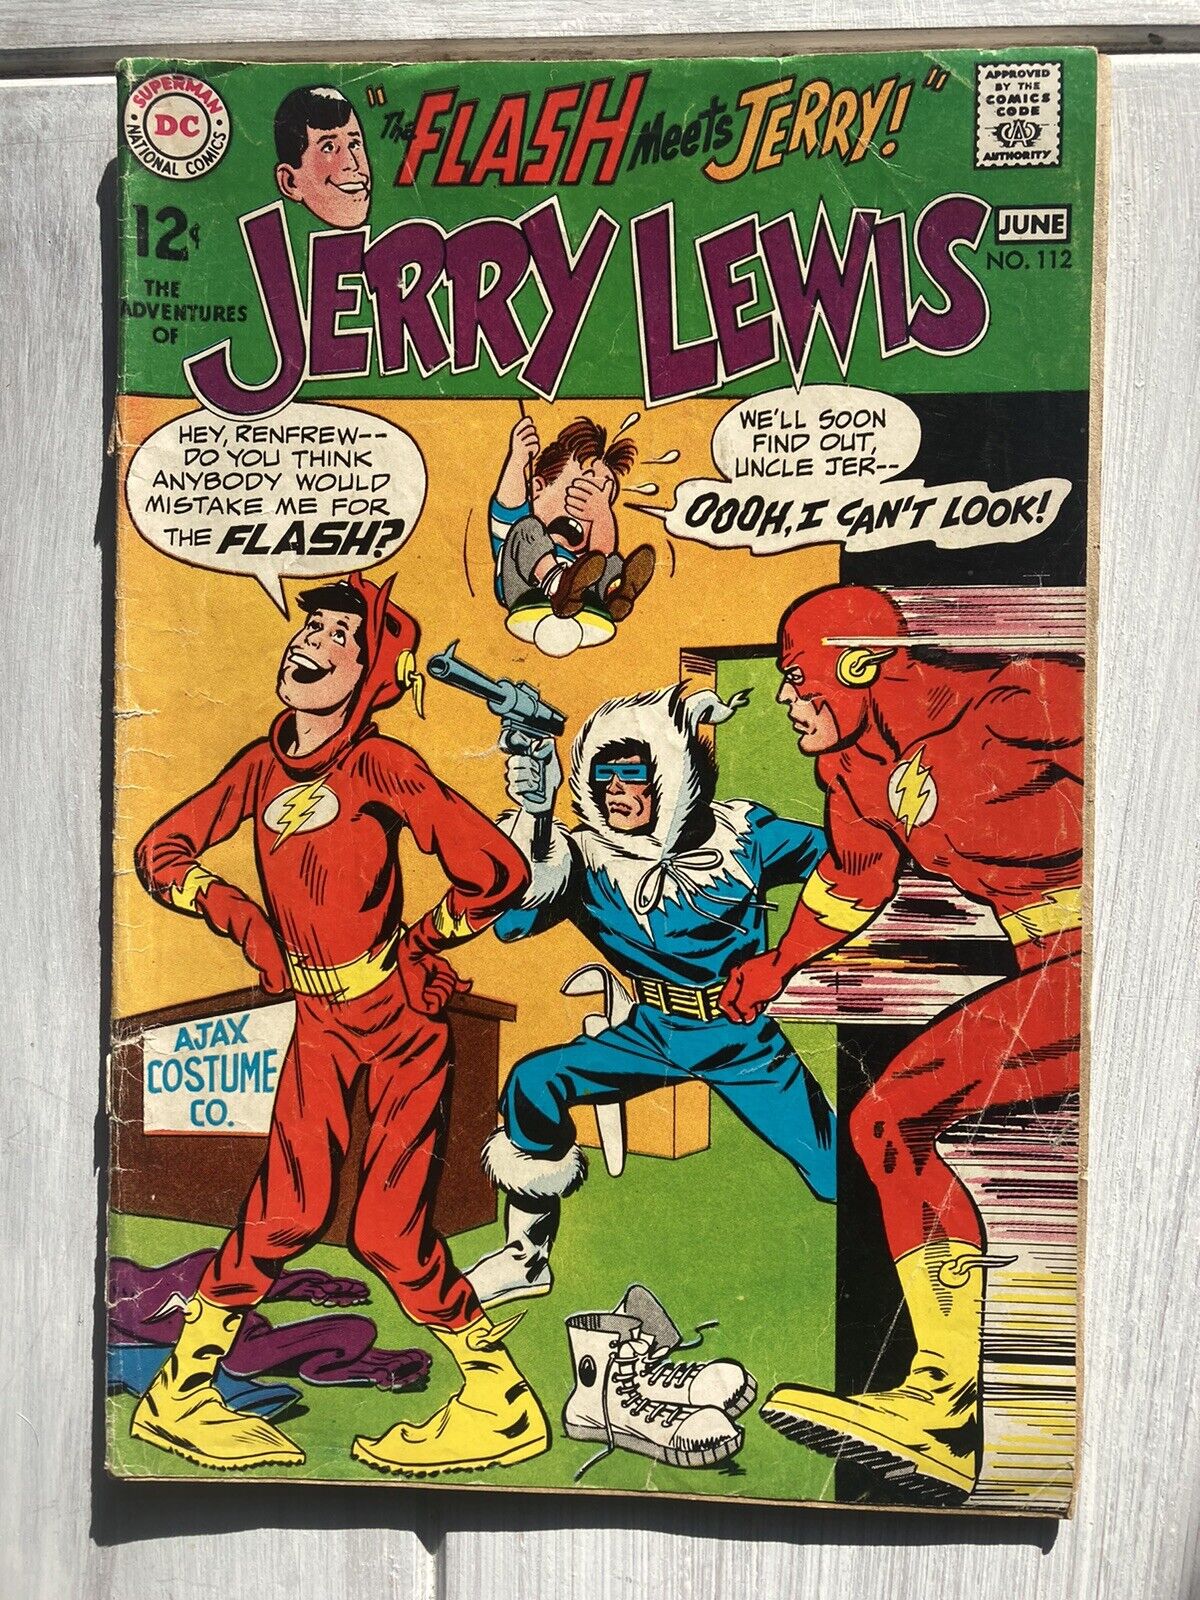 The Flash - Rare - Adventures of Jerry Lewis #112 (1969) Flash Meets Jerry